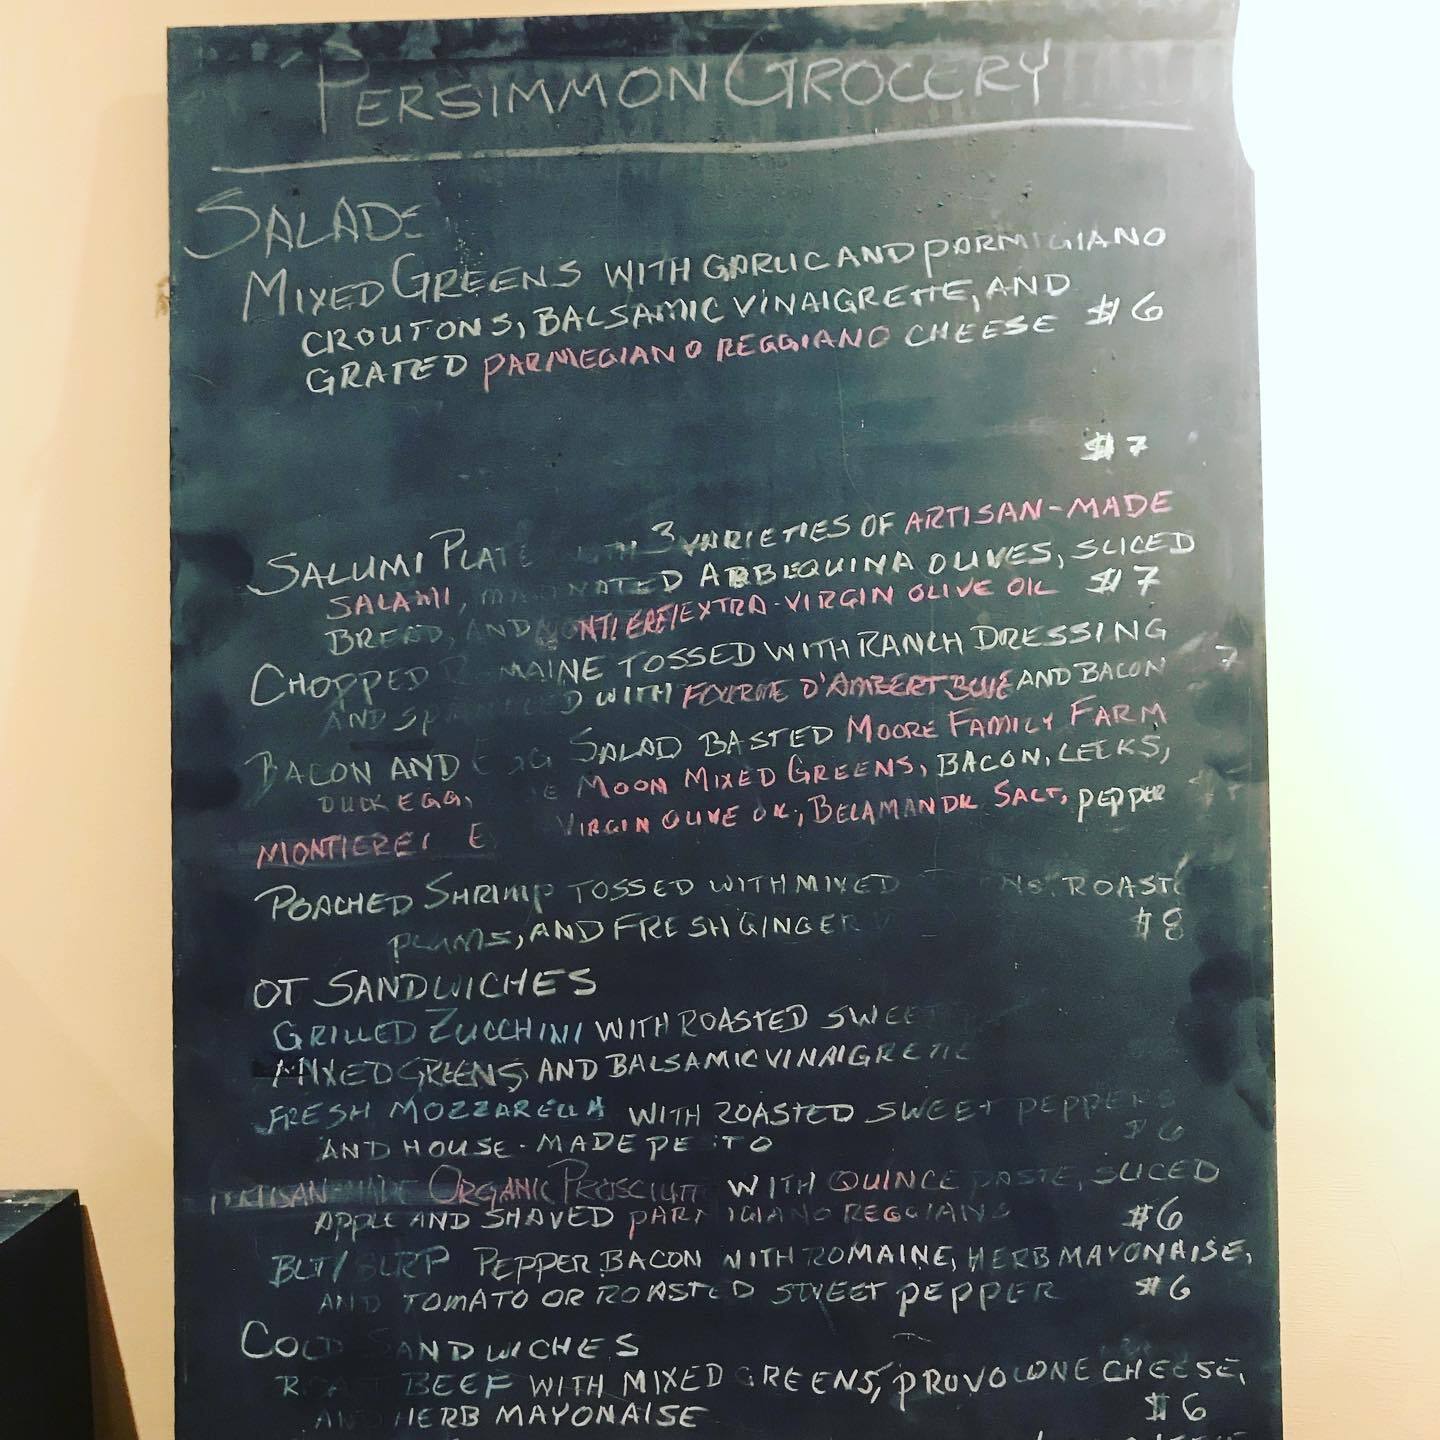 Photo of a chalkboad menu for Persimmon Grocery, including salads and sandwiches. Photo by Thad Morrow. 